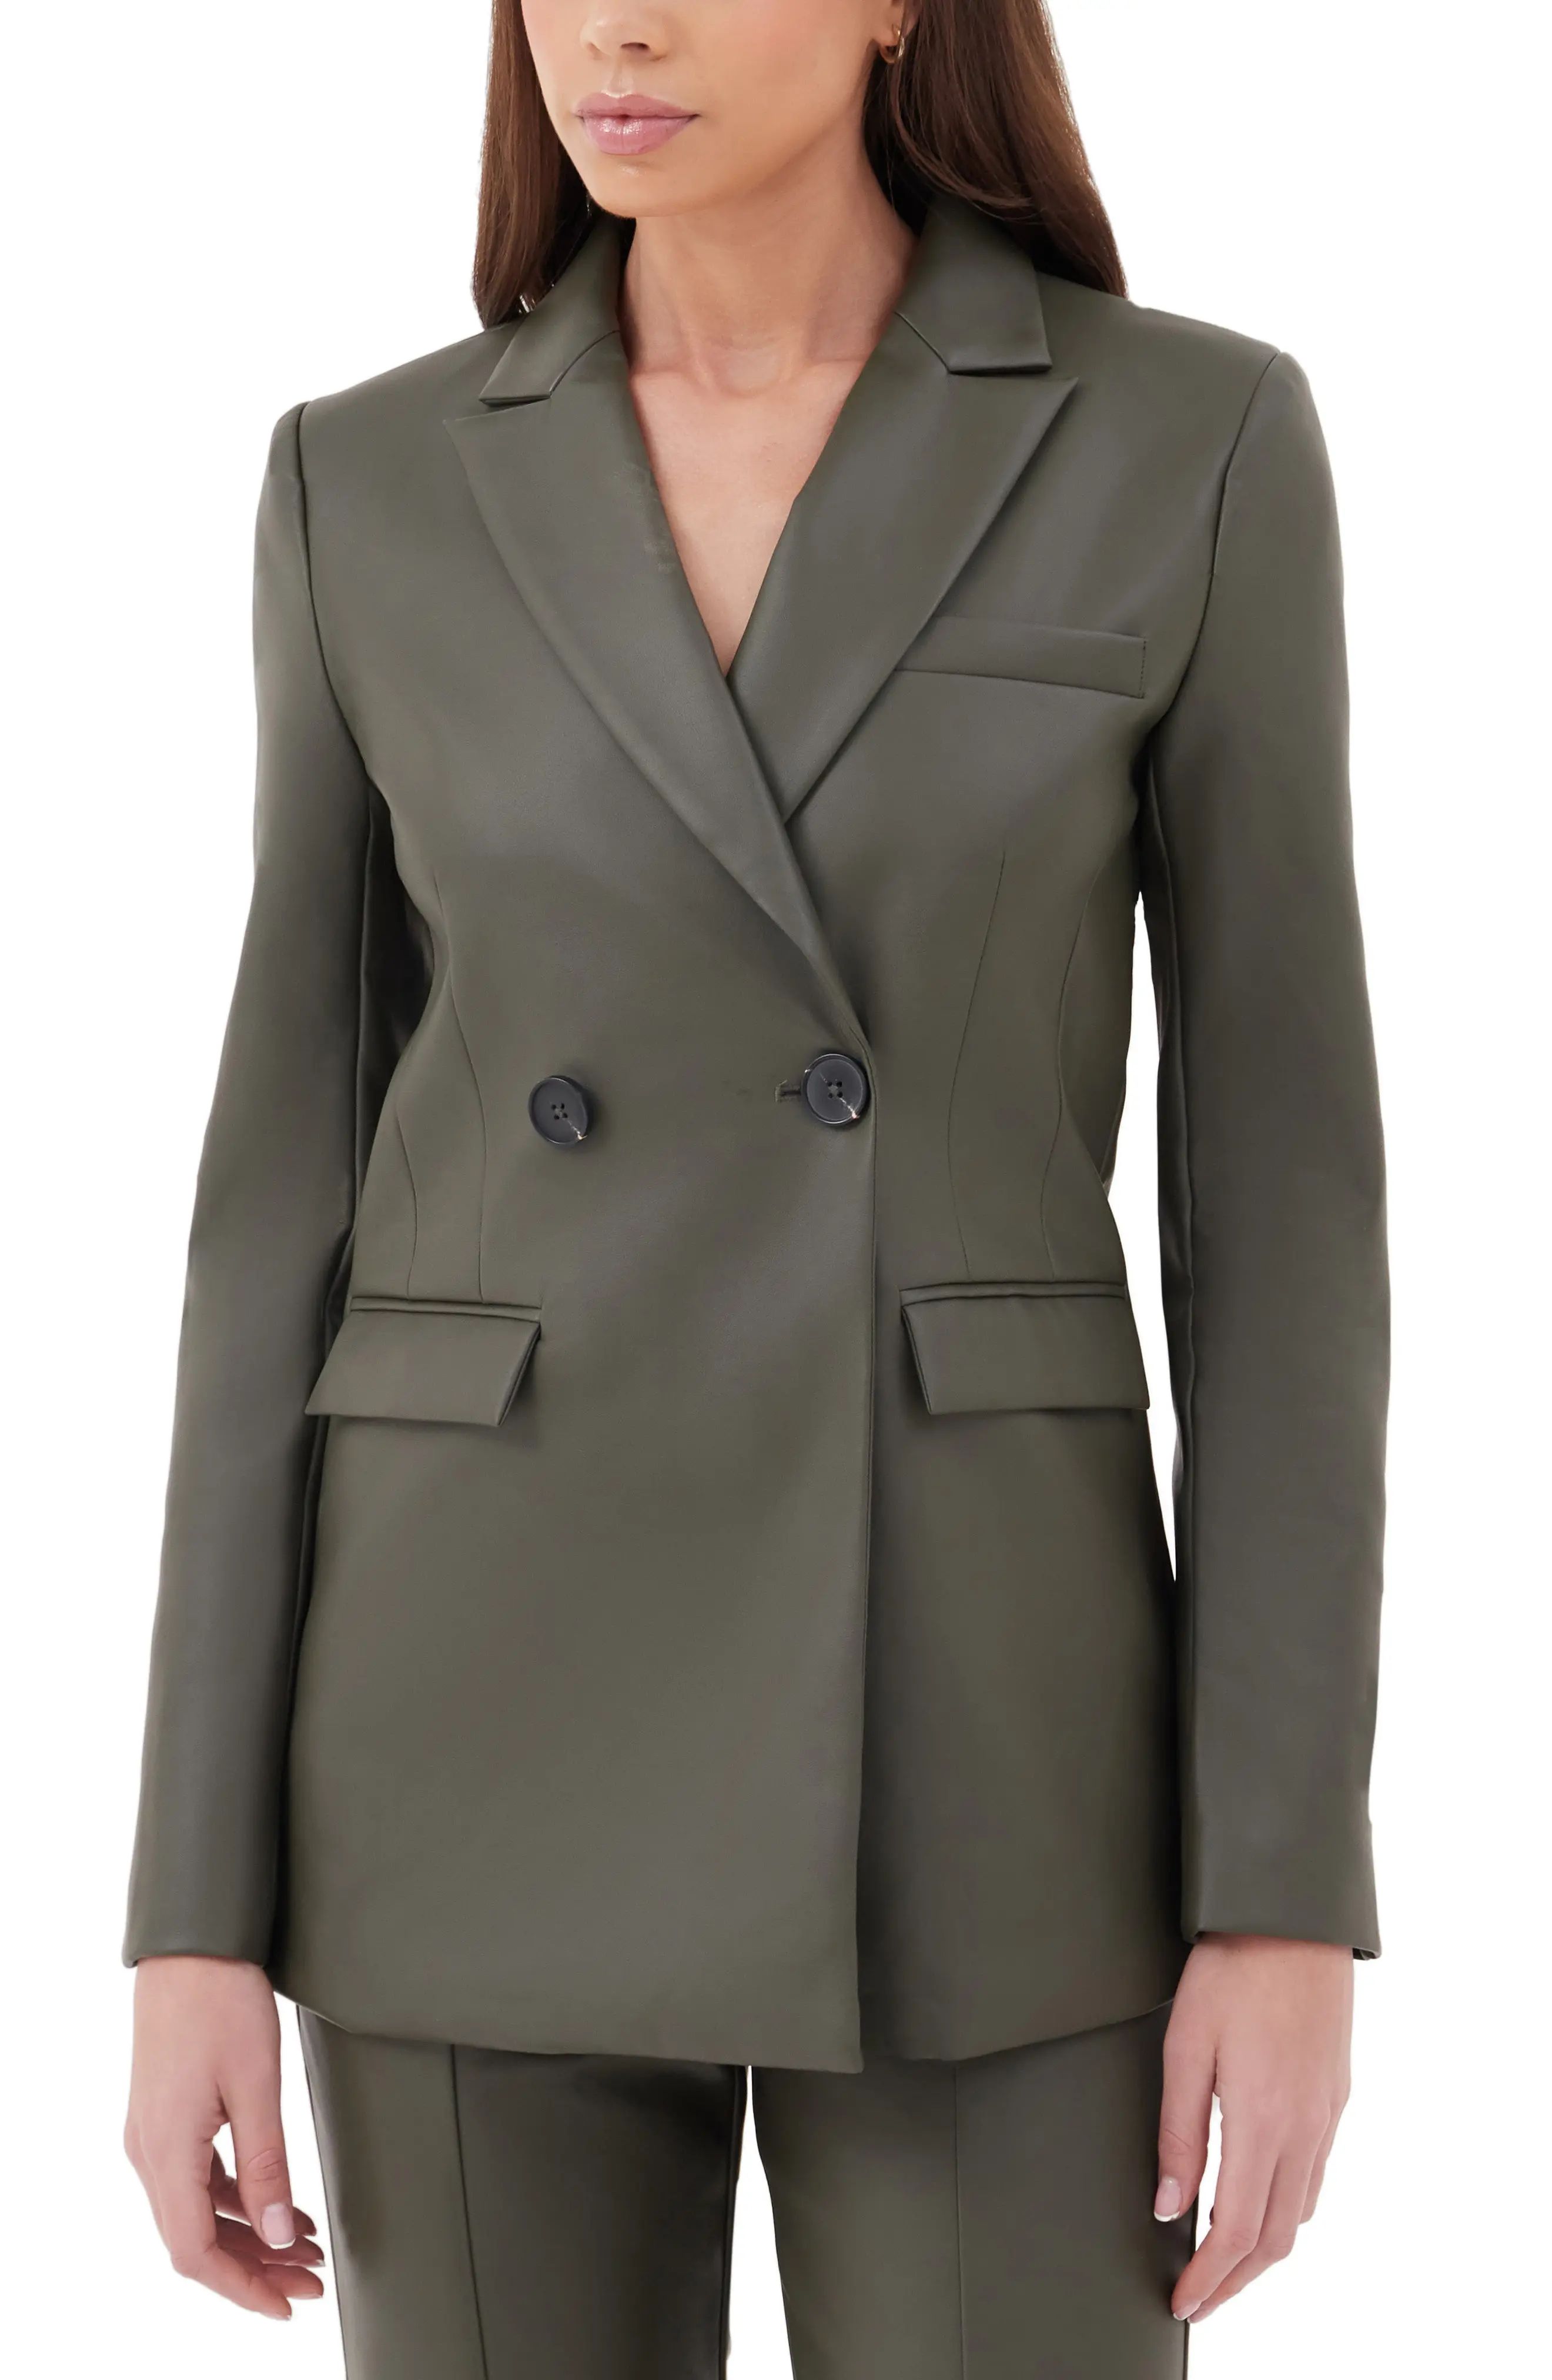 4th & Reckless Tersa Faux Leather Blazer in Khaki at Nordstrom, Size Small | Nordstrom